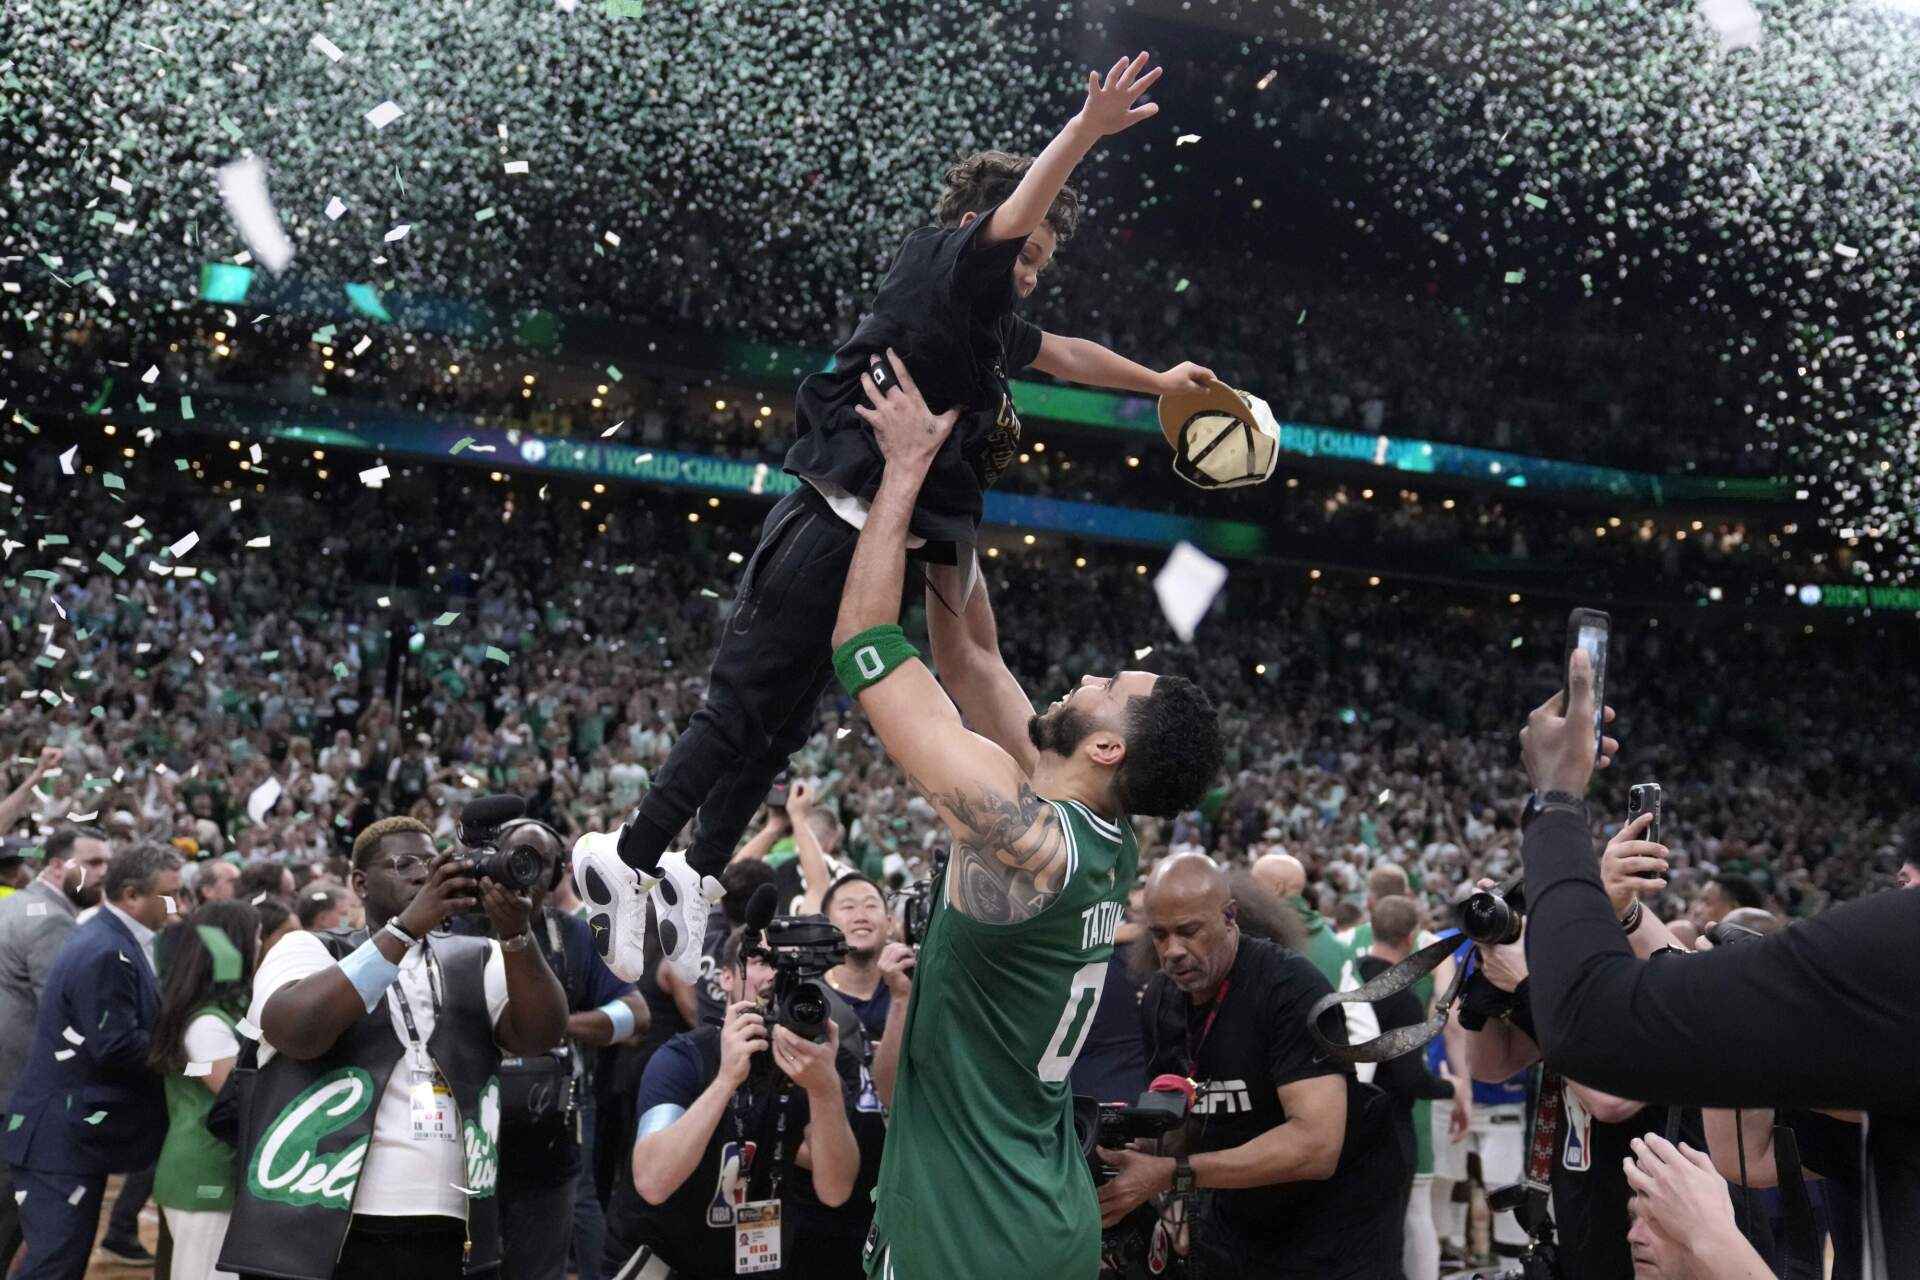 Boston Celtics forward Jayson Tatum lifts his son Deuce as he celebrates with the team after the Celtics won the NBA championship with a Game 5 victory over Dallas Mavericks. (Charles Krupa/AP)